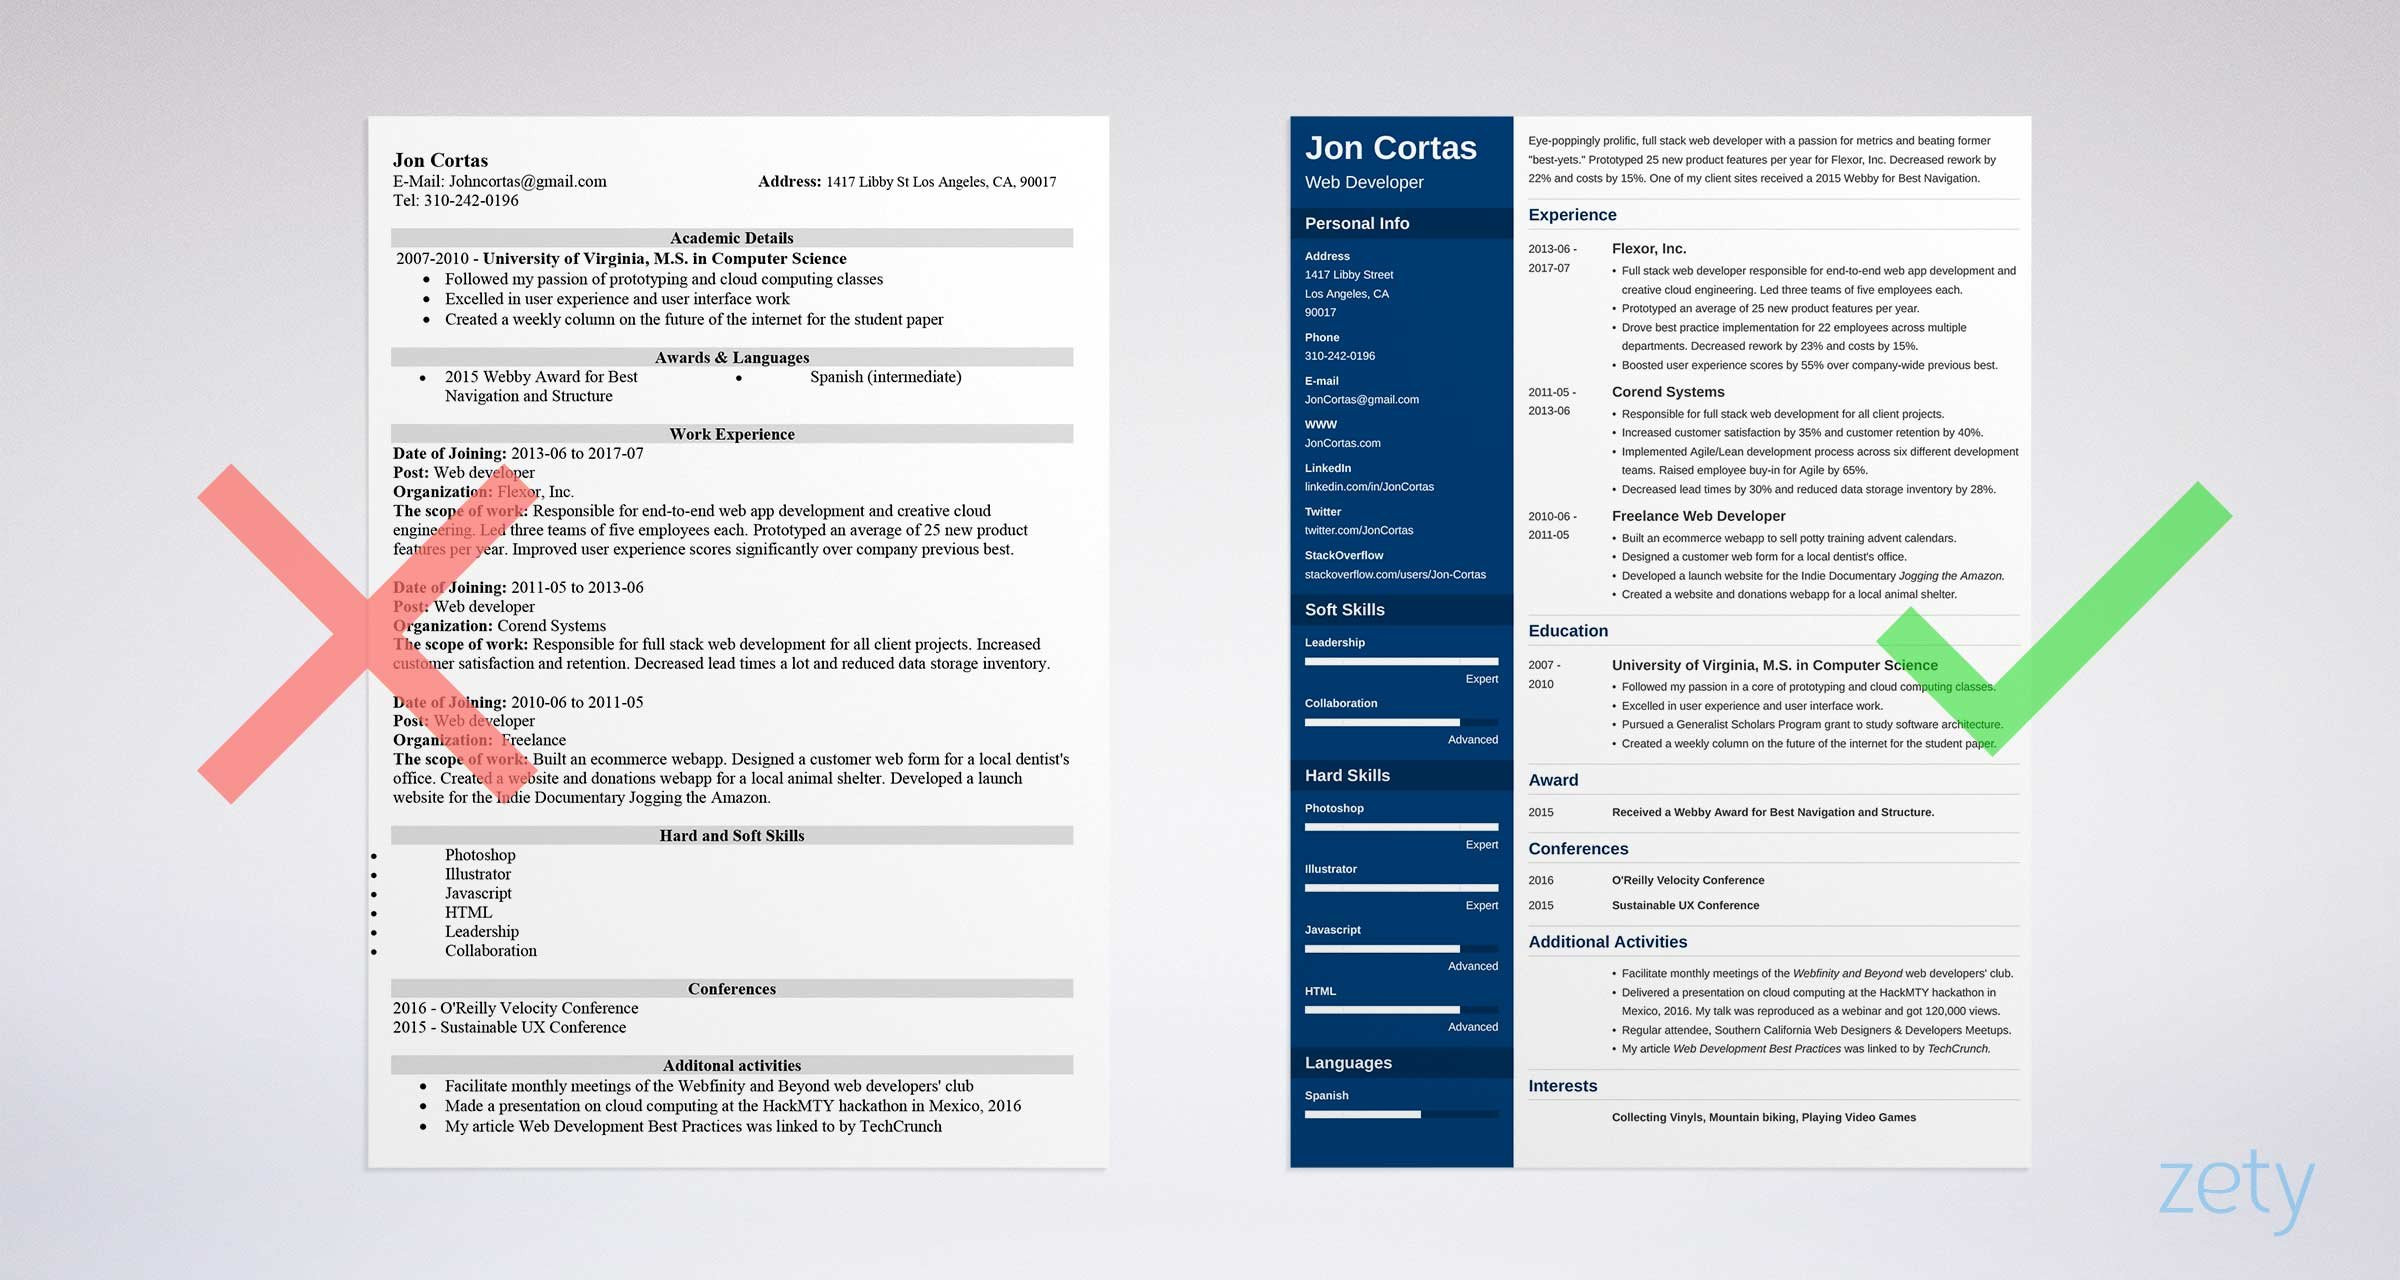 Free Resume Template Resume Template For Word Best Of Free Resume Templates For Word 15 Cv Resume Formats To Of Resume Template For Word free resume template|wikiresume.com